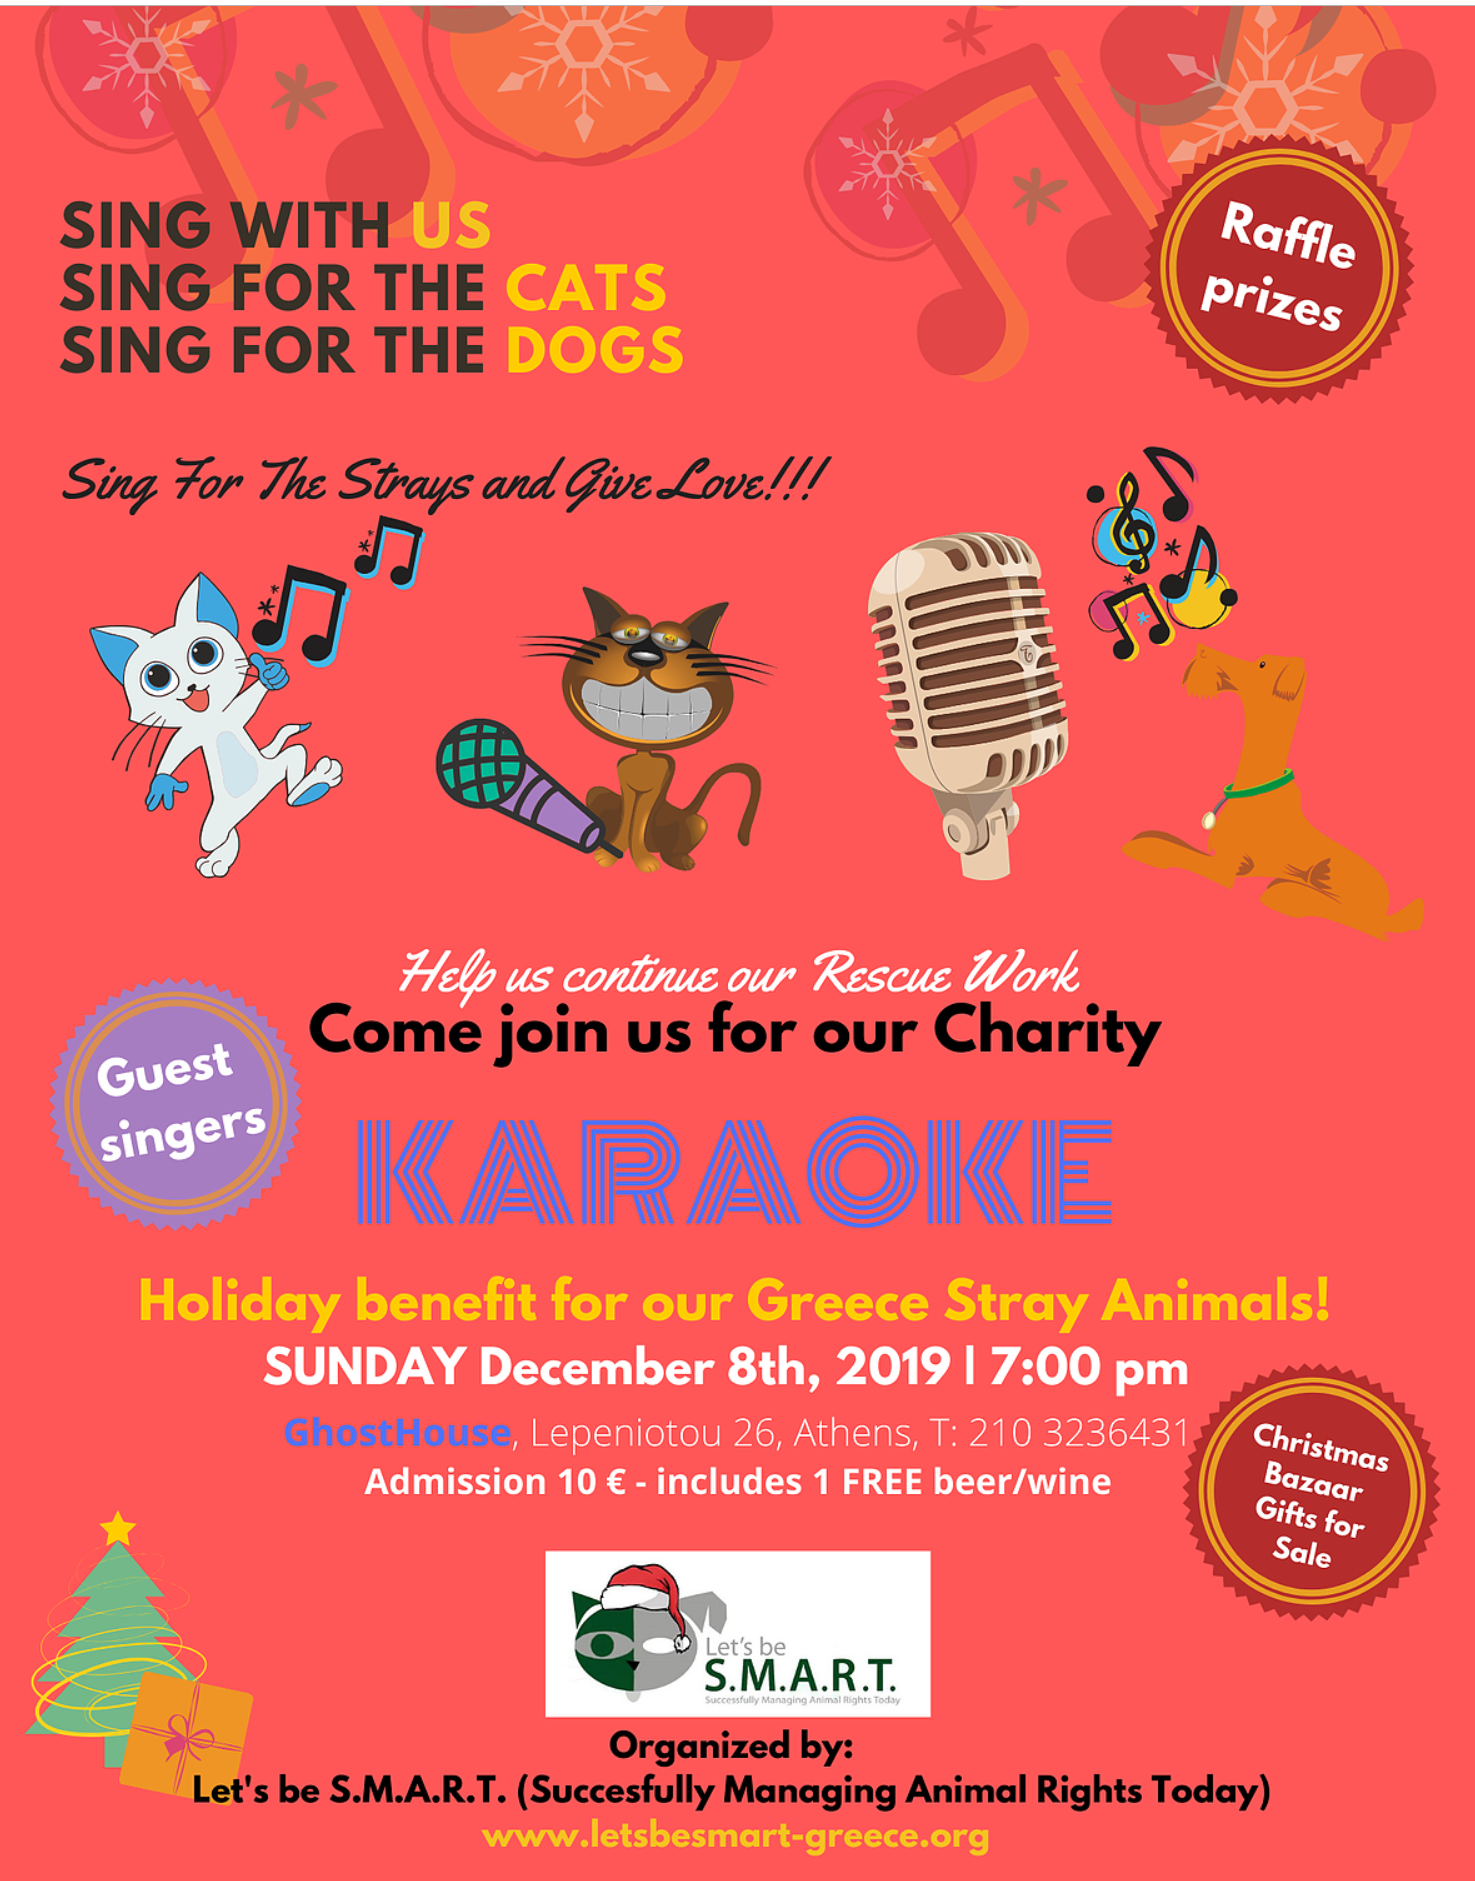 Let's be .. animal welfare org invites all to Charity KARAOKE Event